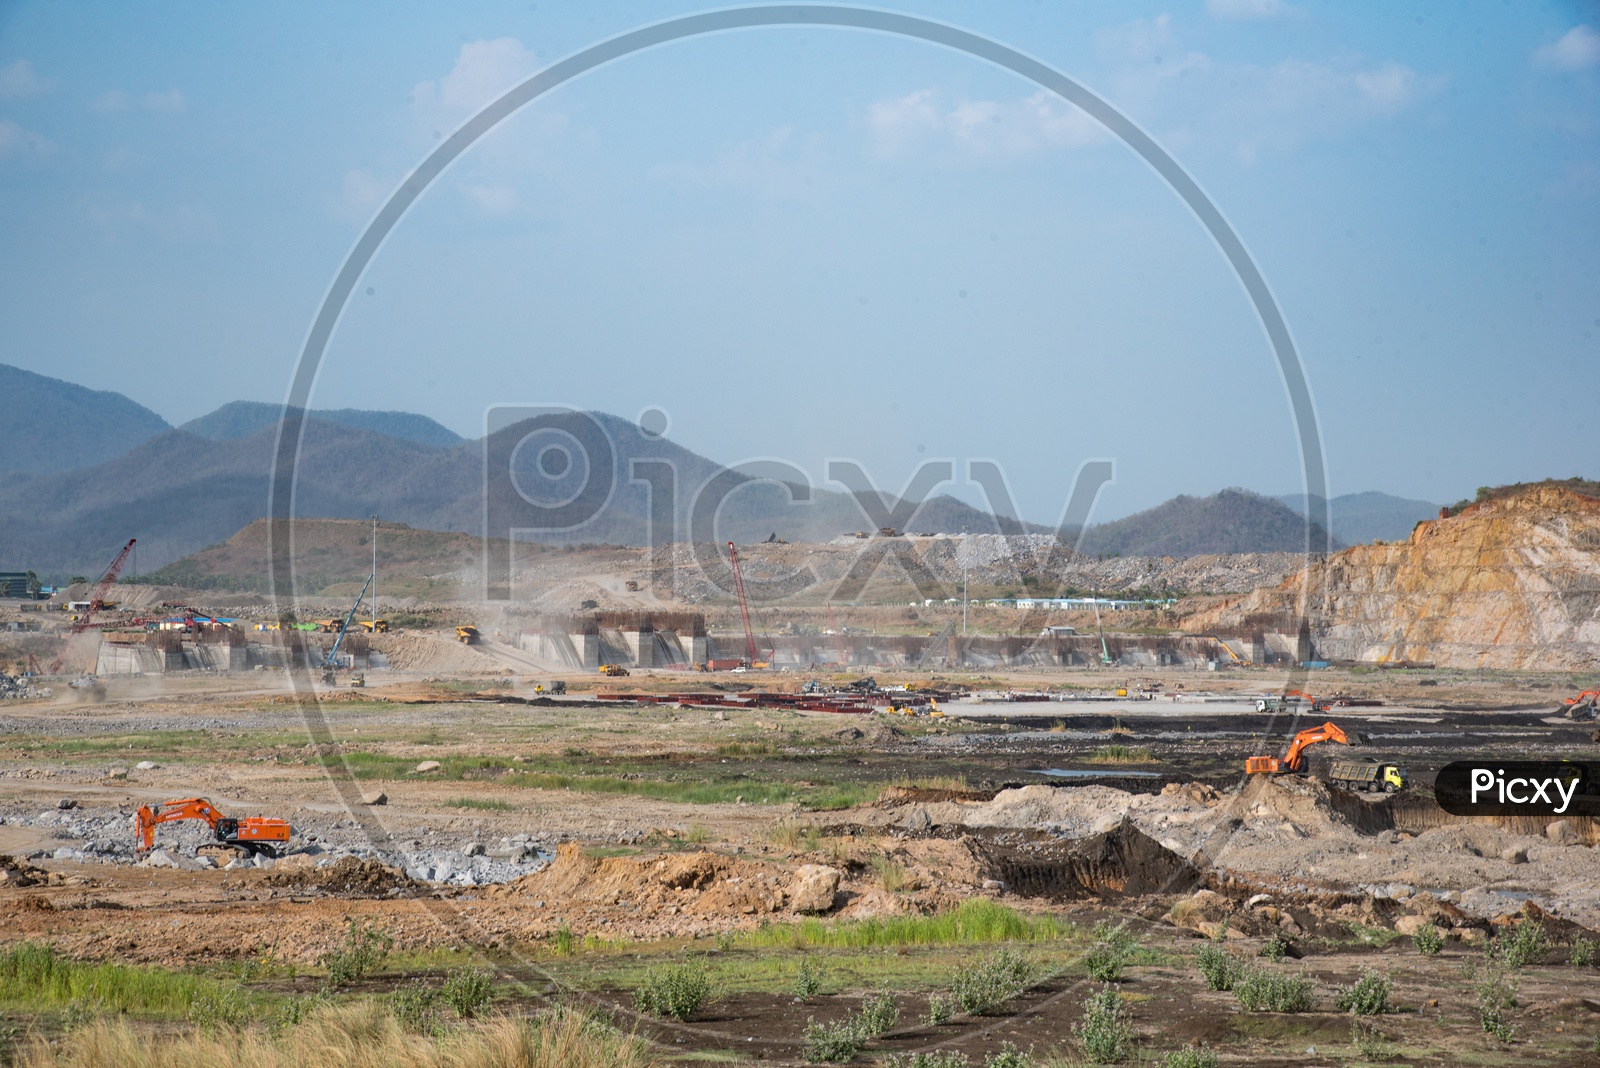 Spill Way for Water Flow being constructed at Polavaram Irrigation Project Dam Site